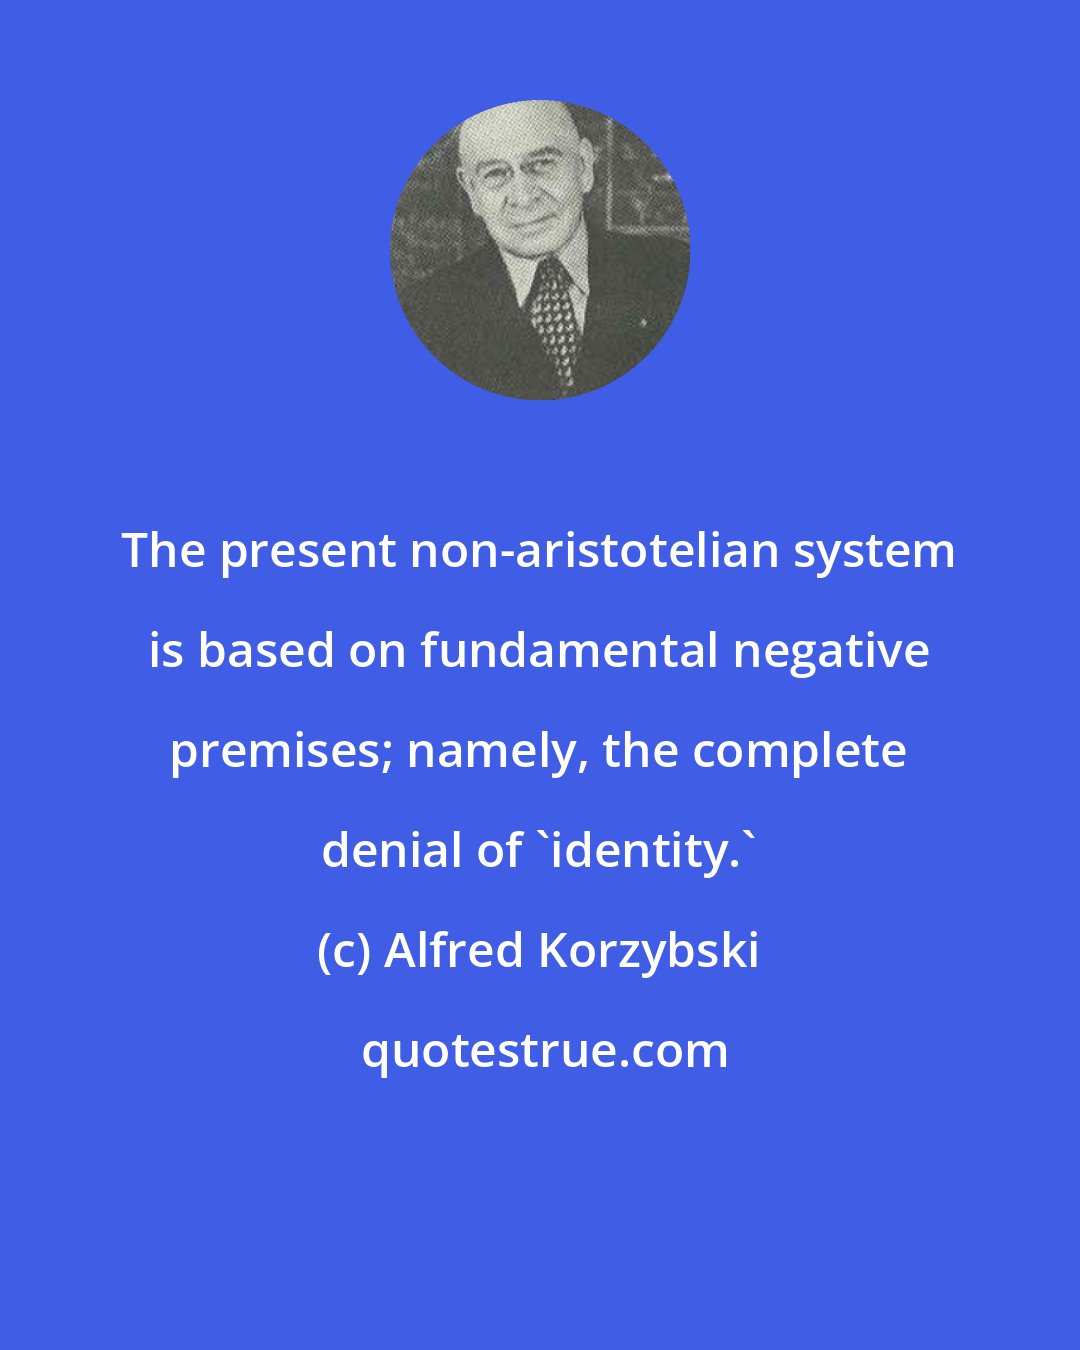 Alfred Korzybski: The present non-aristotelian system is based on fundamental negative premises; namely, the complete denial of 'identity.'